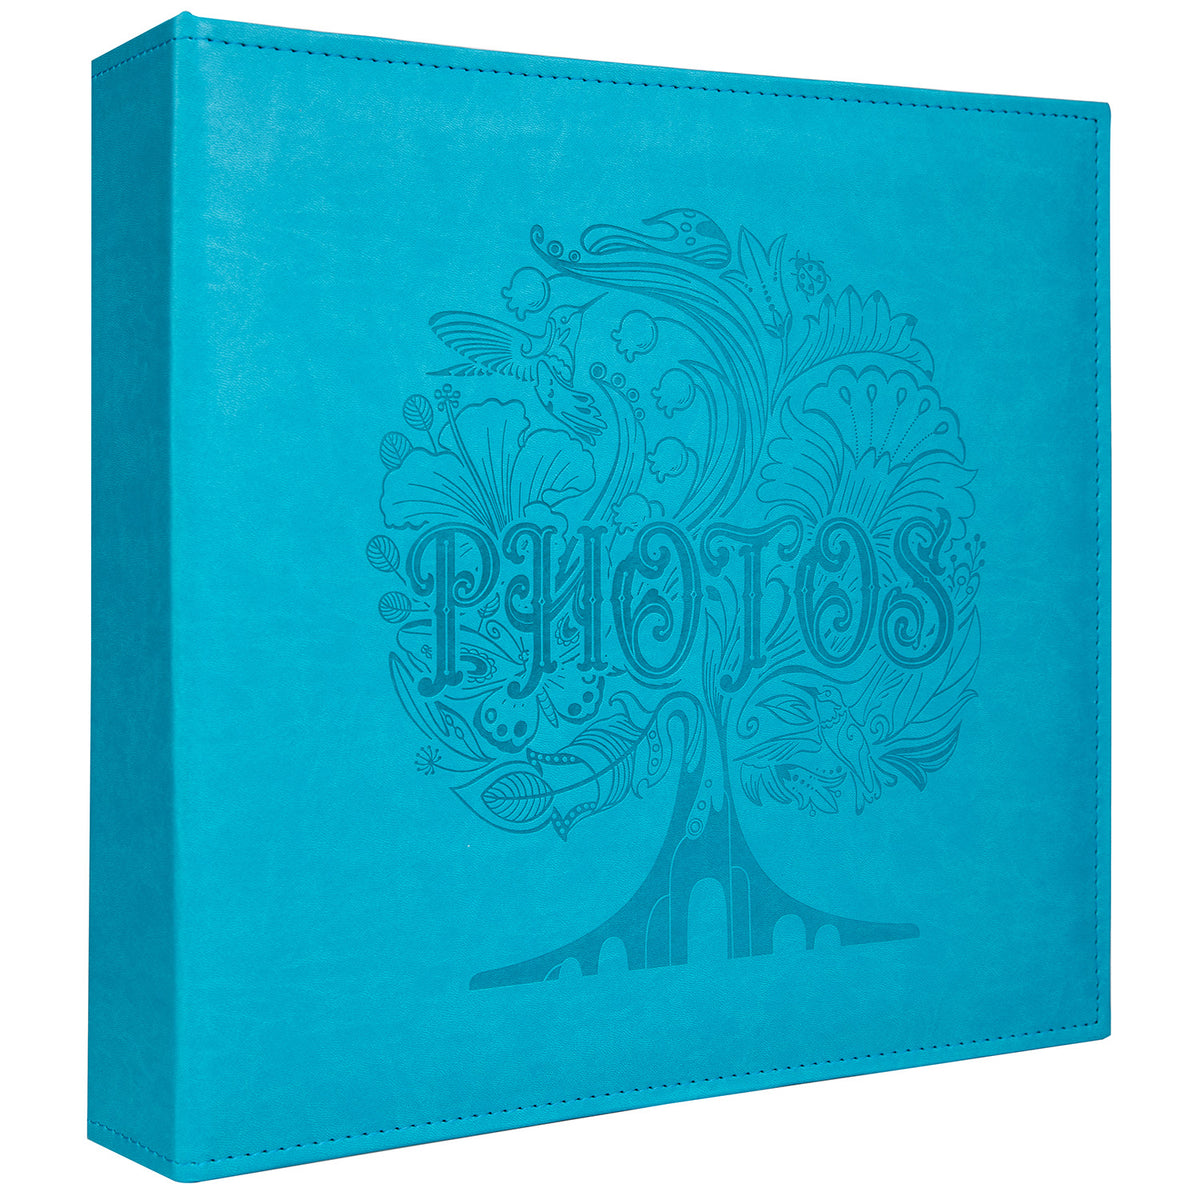 RECUTMS 600 Photo Picture Album Memo Album Slots Album PU Leather Cover  Sewn Bonded Holds 4x6 Photos 5 Per Page Family Album Gift for Mother Father